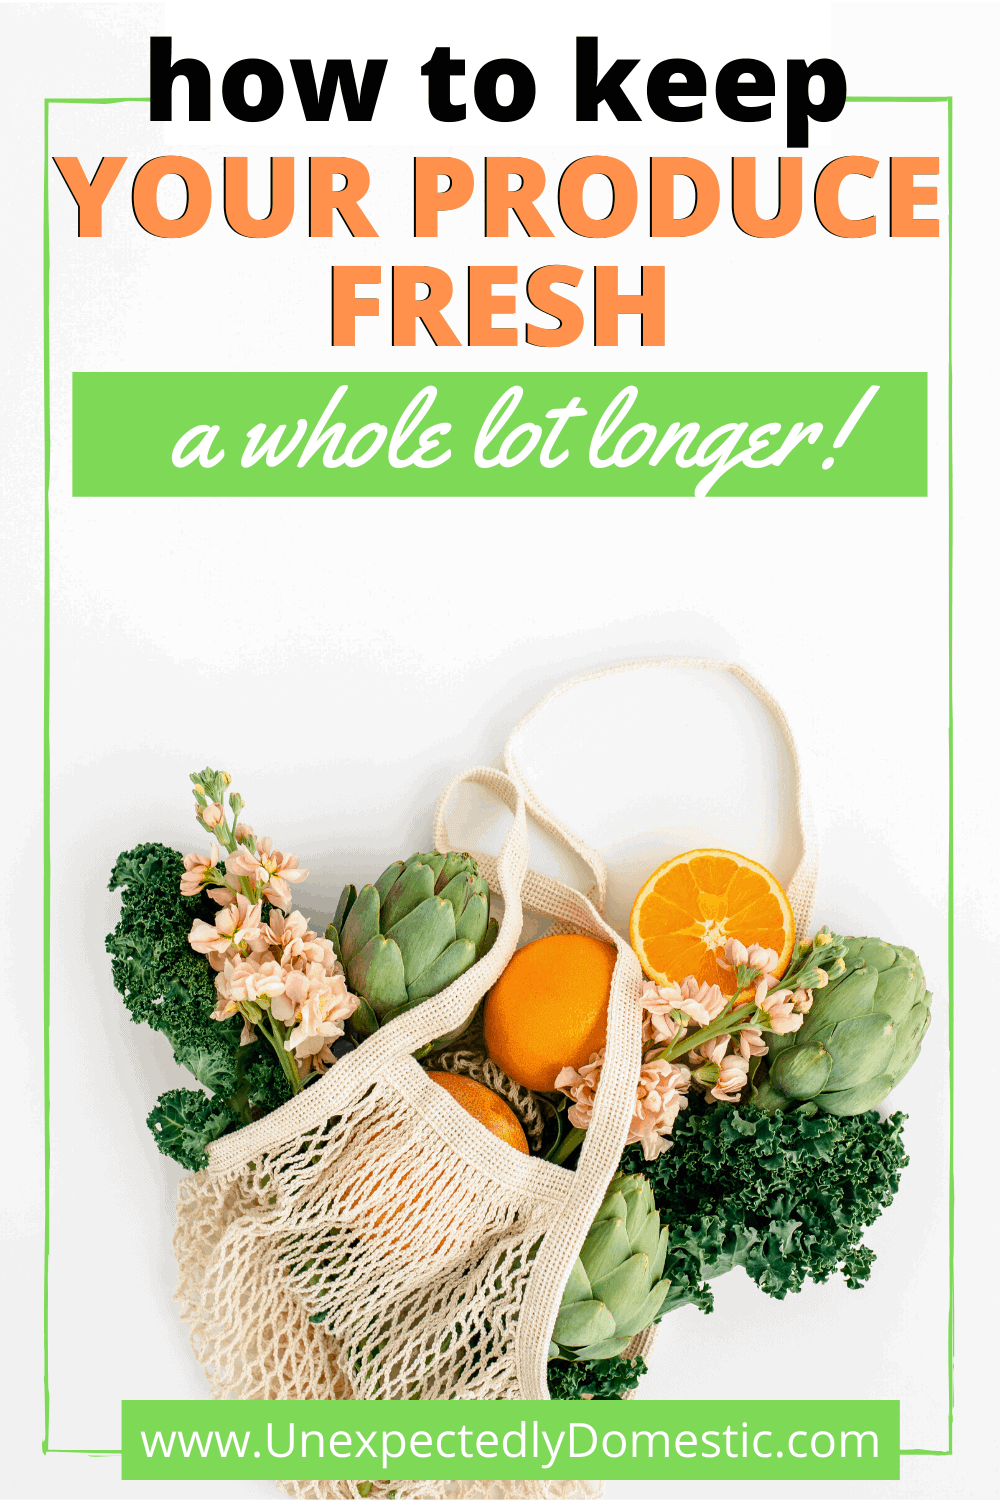 How to keep food fresh longer! Exactly how to store produce and food so it lasts longer, so you can eliminate food waste and stretch your grocery budget.